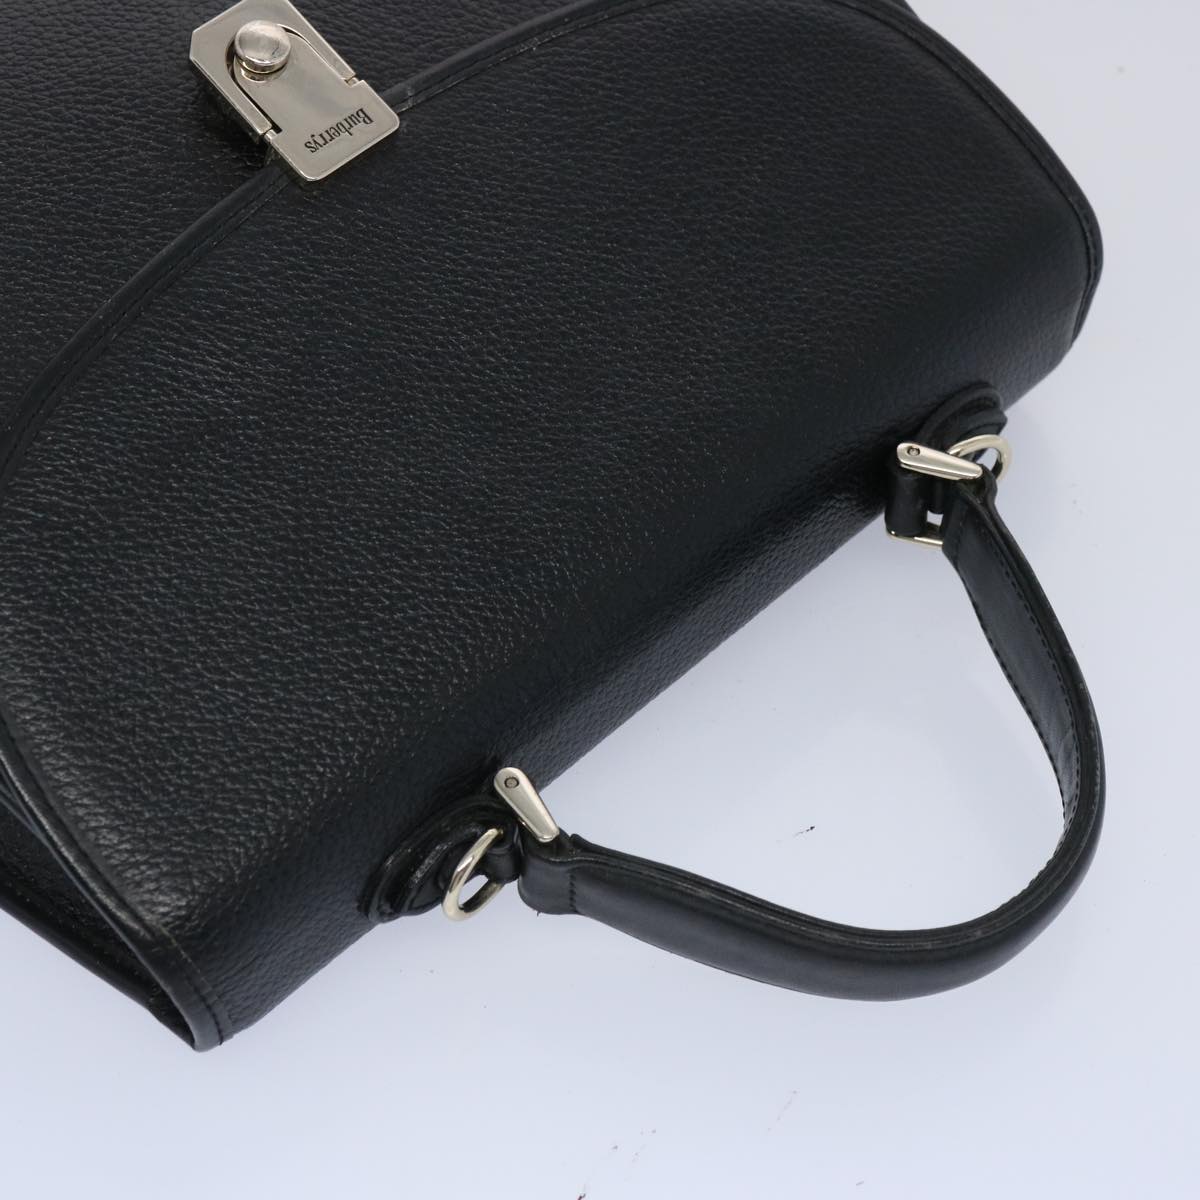 Burberrys Hand Bag Leather Black Auth bs11684